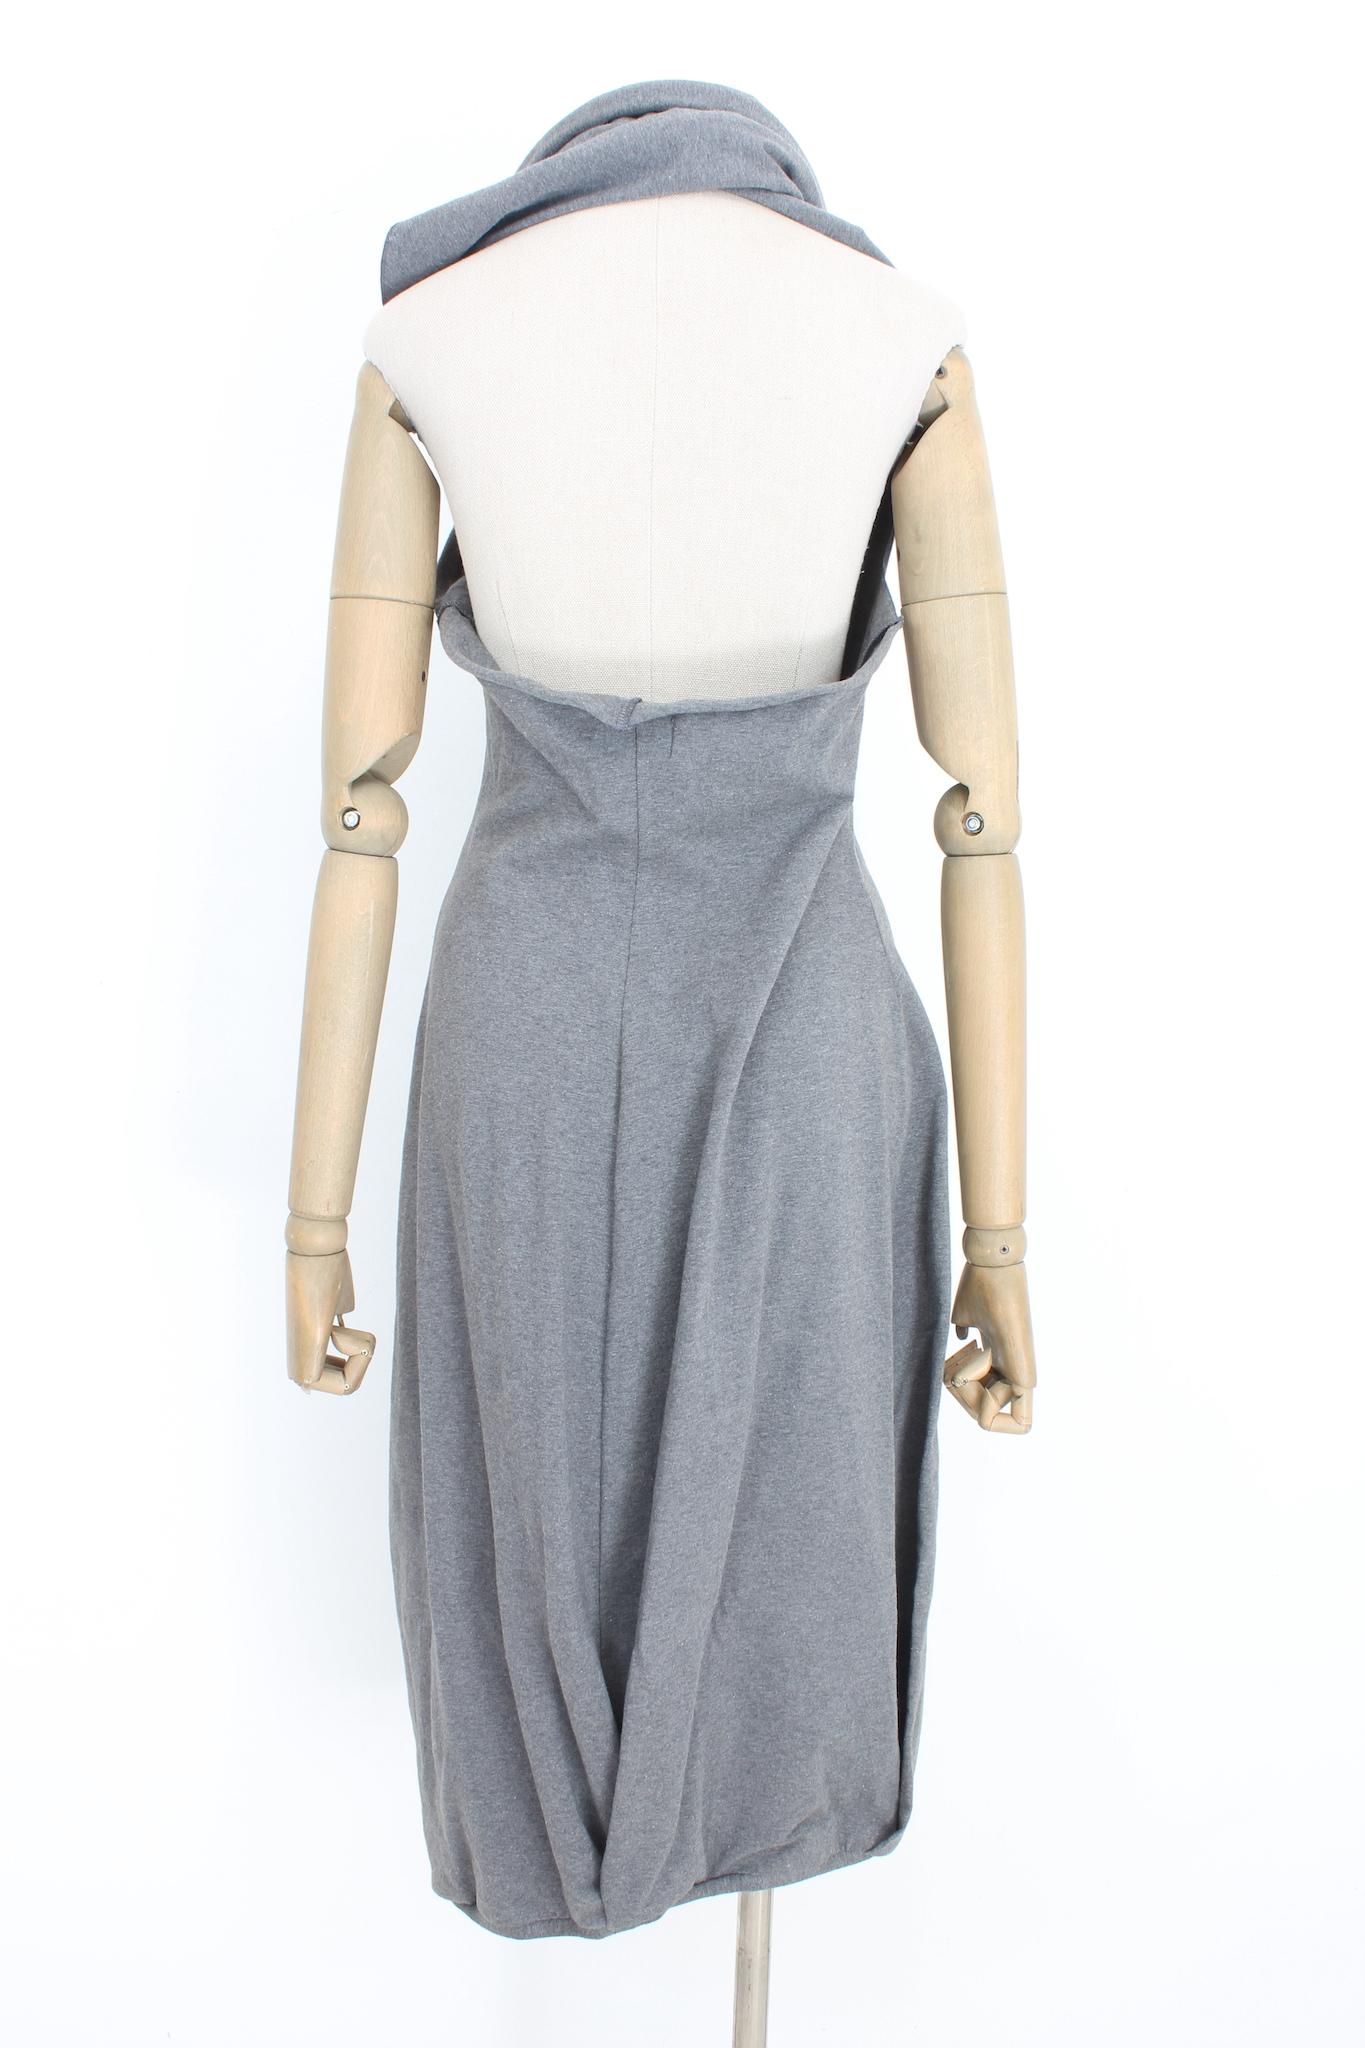 The Marcel Marongiu sack dress from the 2000s is a casual yet stylish piece made of comfortable gray cotton fabric. It features a unique scarf closure that wraps around the neck, adding a touch of elegance to the simple design. The dress has a